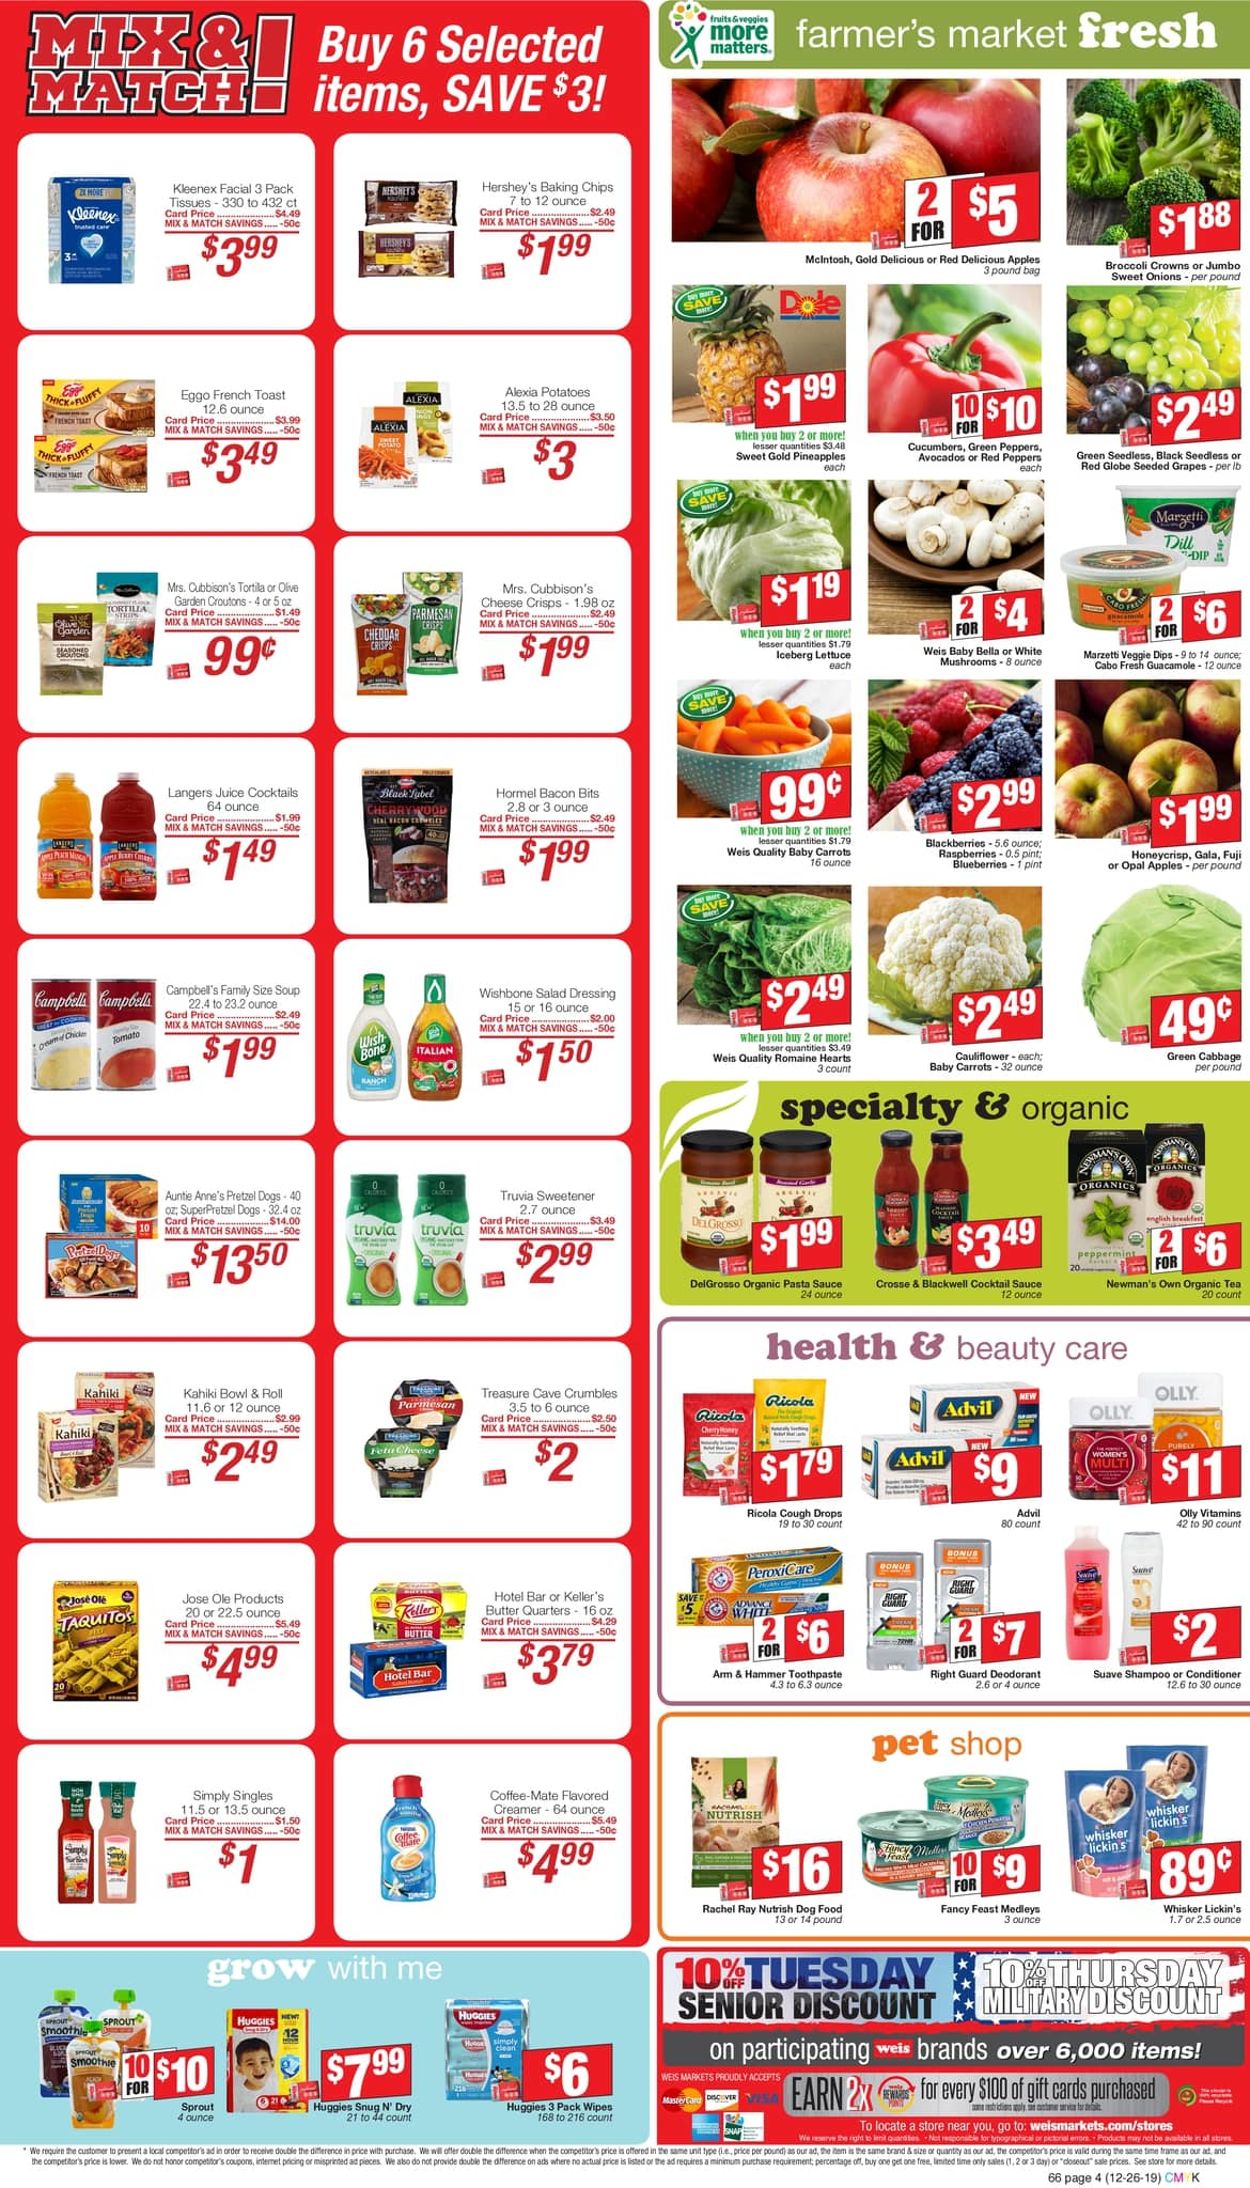 Weis - New Year's Ad 2019/2020 Weekly Ad Circular - valid 12/26-01/02/2020 (Page 4)